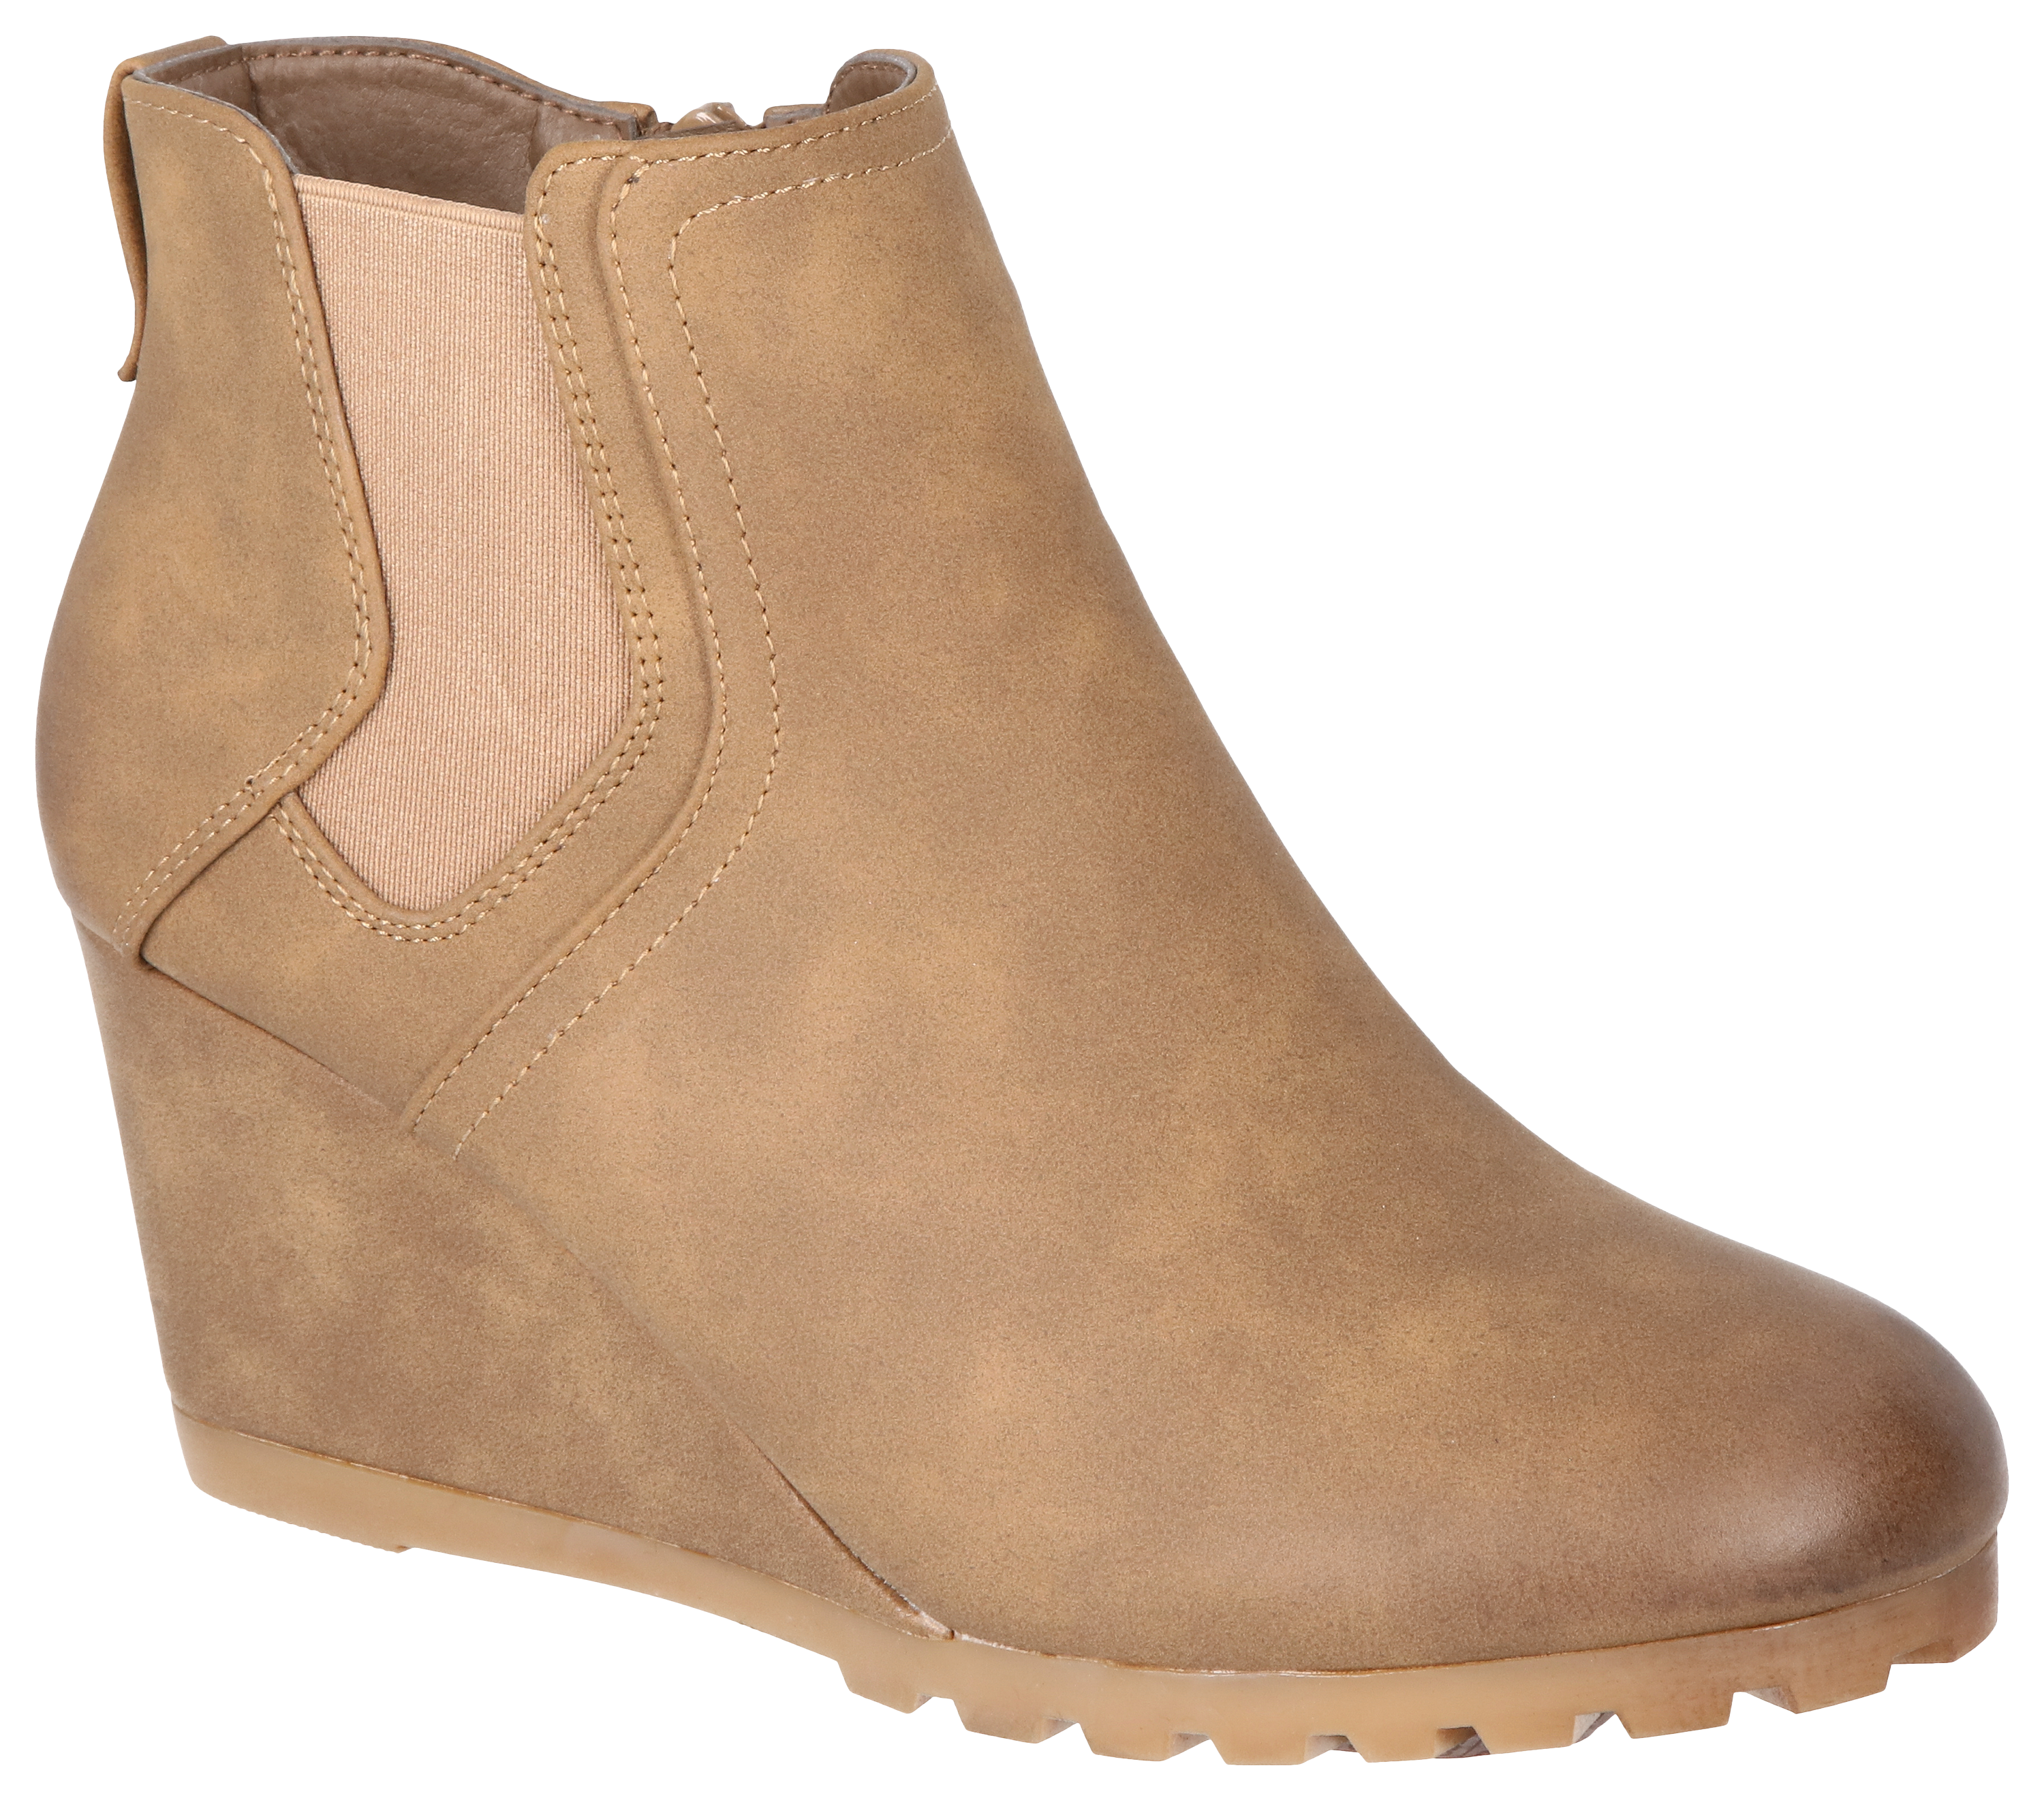 Natural Reflections Trista Rugged Boots for Ladies - Taupe - 8.5M